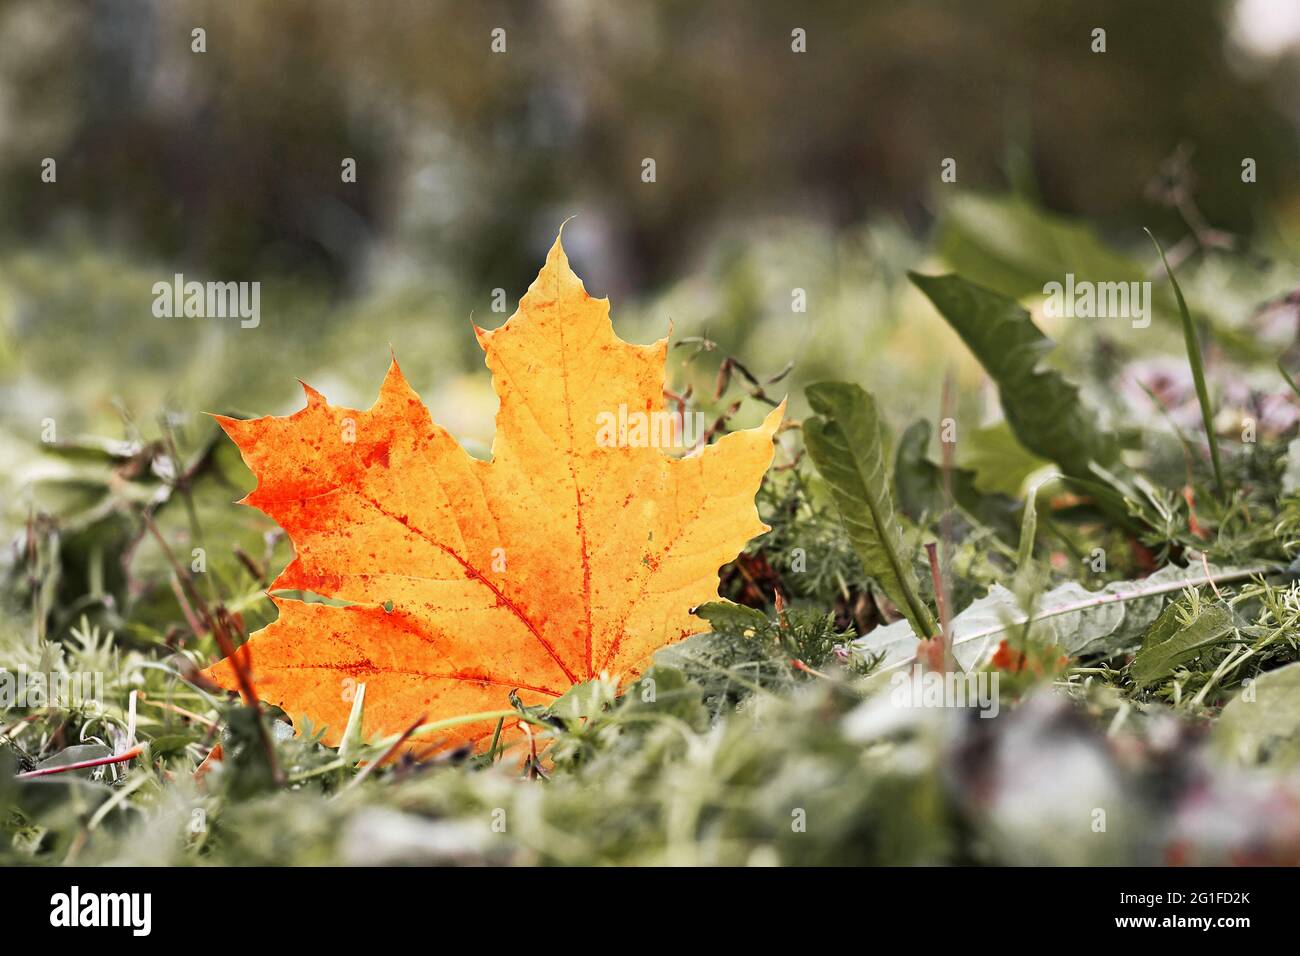 yellow and red maple leaf fallen to ground, color graded, copy space Stock Photo